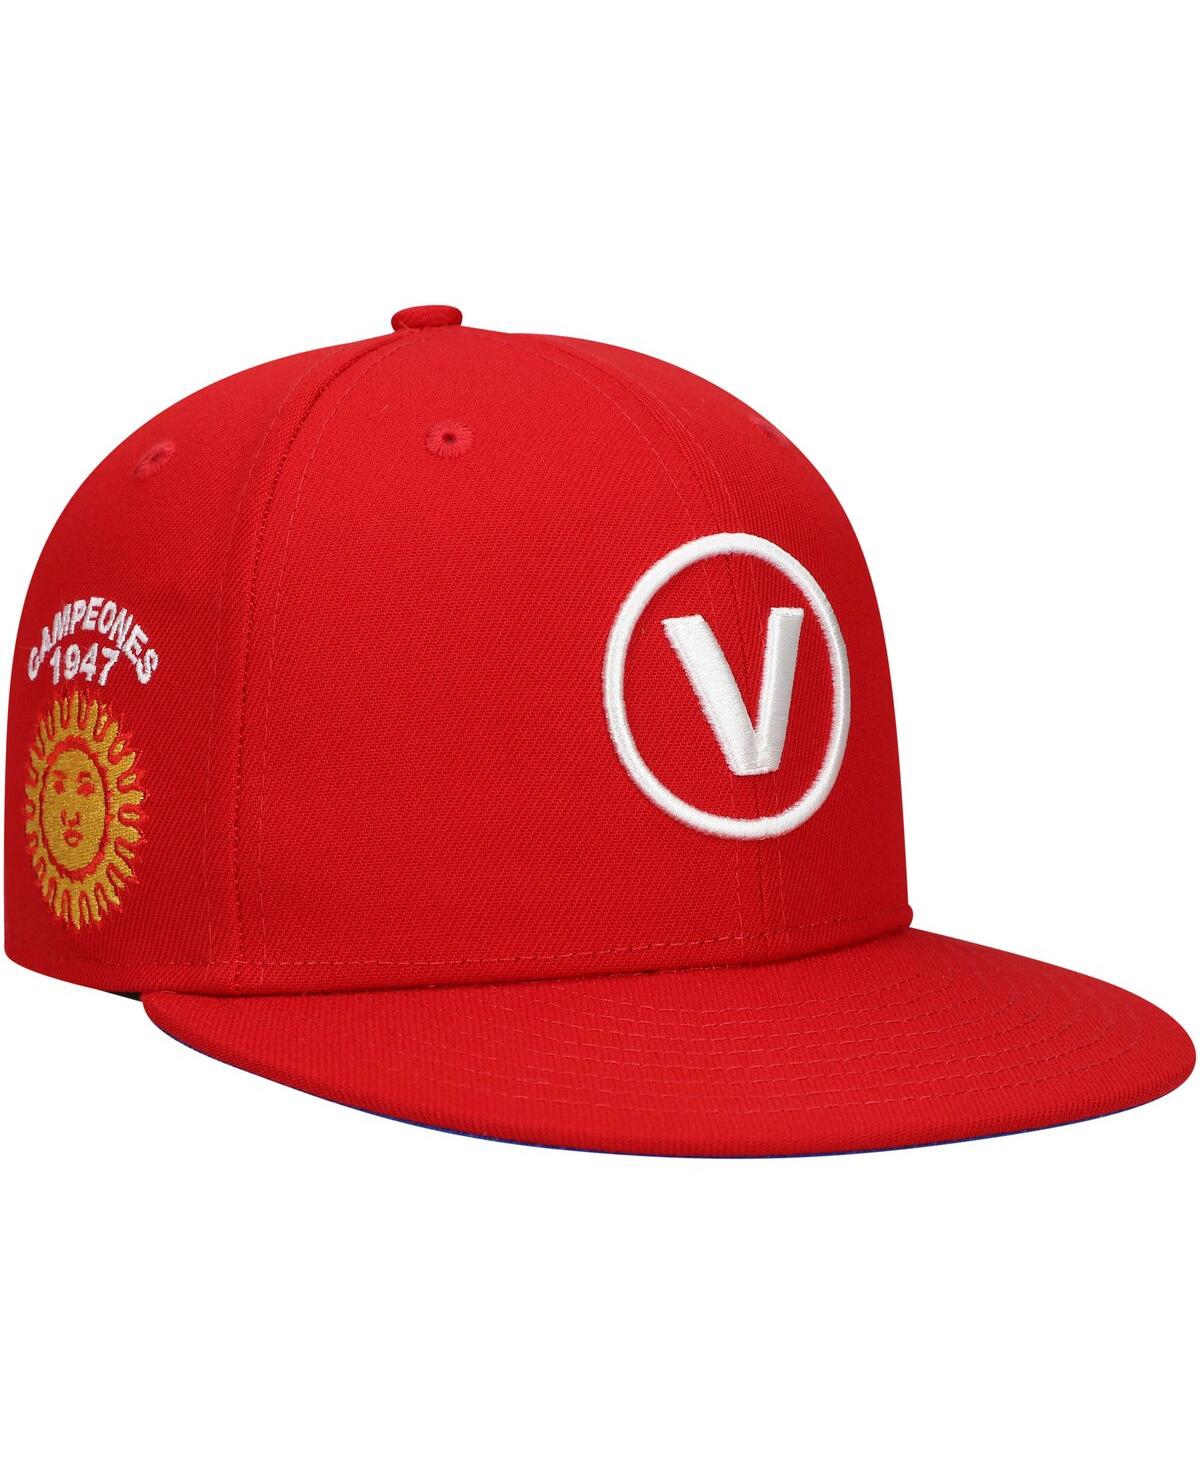 Shop Rings & Crwns Men's  Red Vargas Campeones Team Fitted Hat